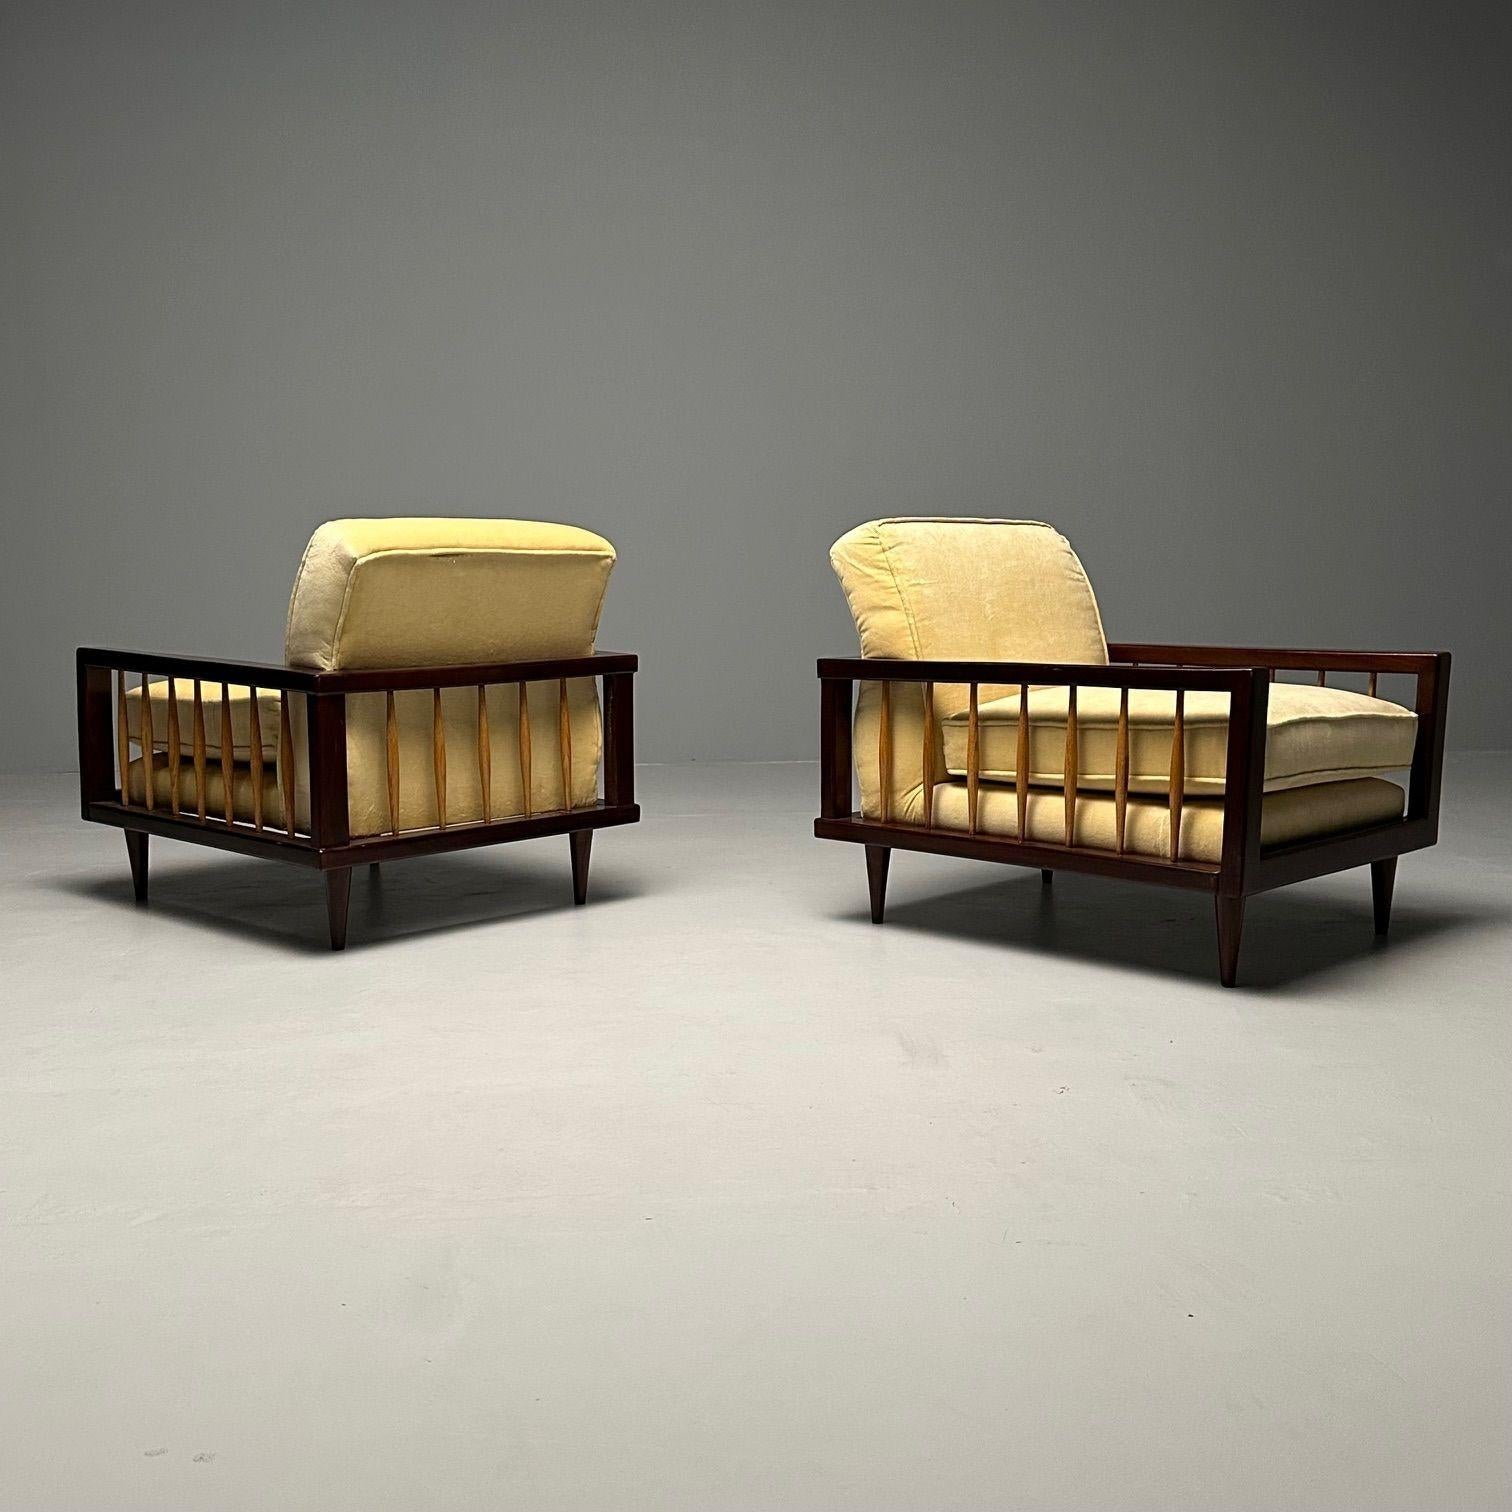 Pair Mid-Century Modern Paolo Buffa Style Arm / Lounge Chairs, Mahogany and Oak

Two mid-century style arm or lounge chairs similar in form to the work of Italian designer, Paola Buffa. The frames and legs are mahogany and the slats within the frame